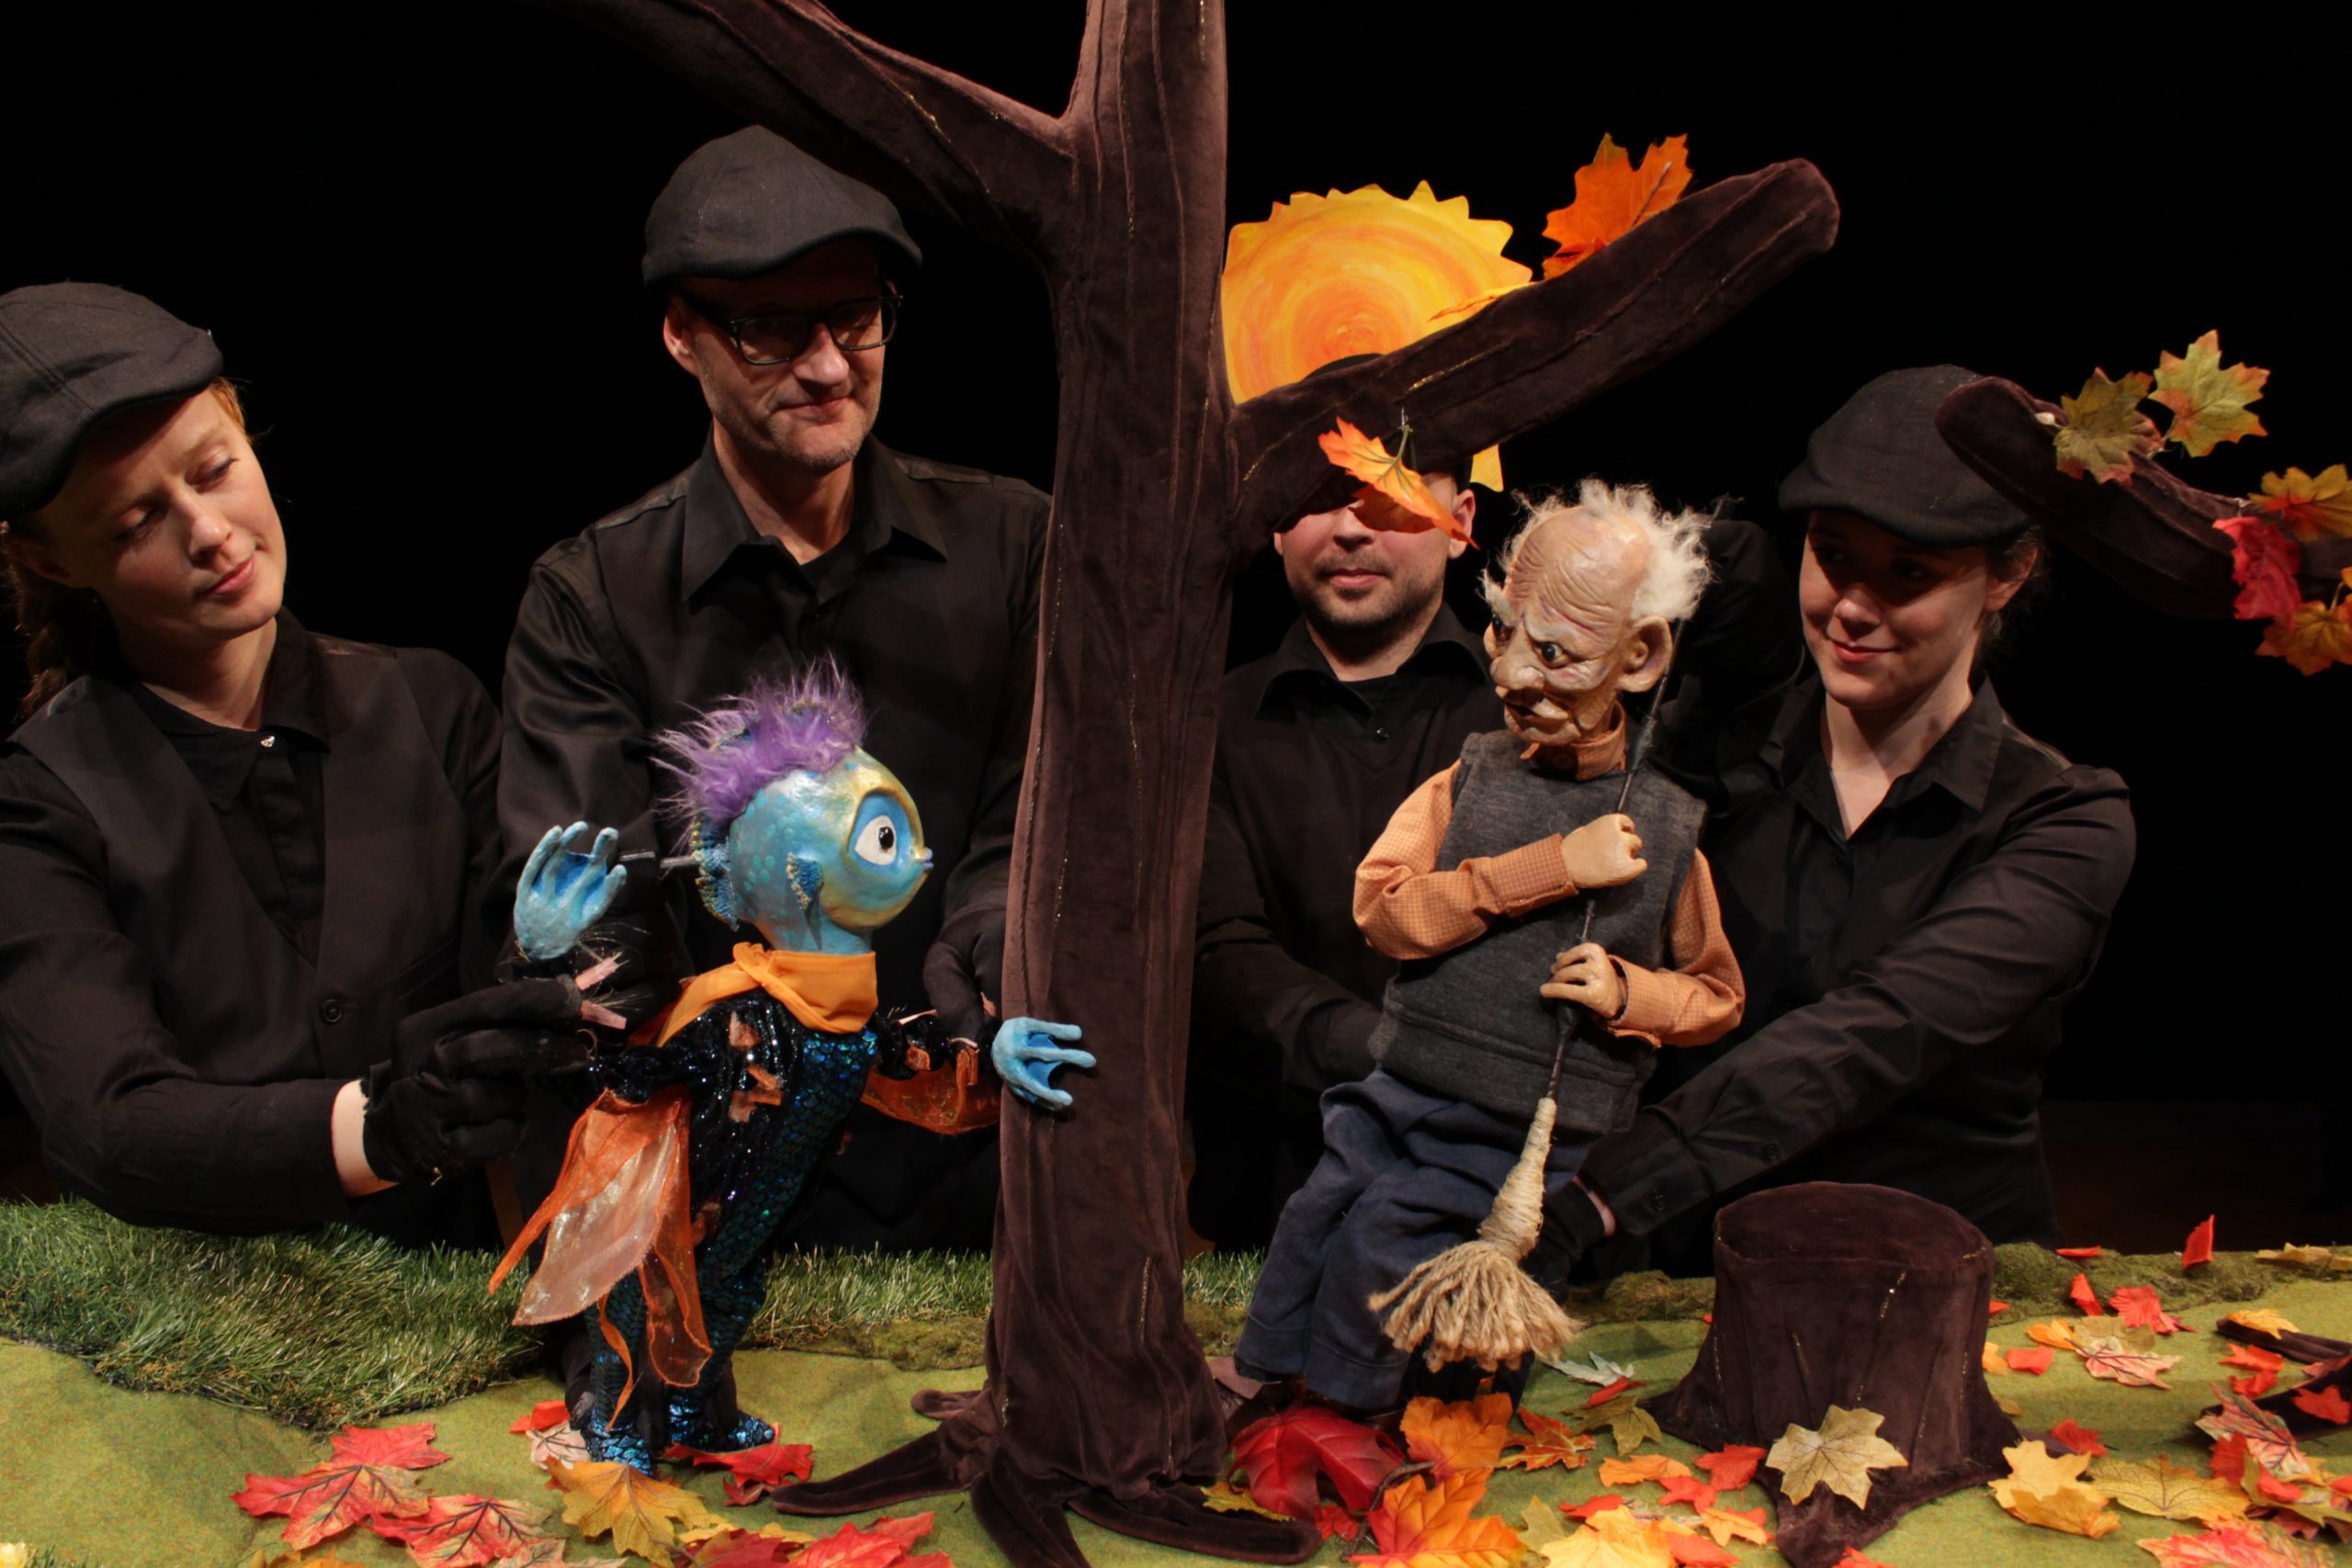 Old Man And The River - Crane Creations Theatre Company